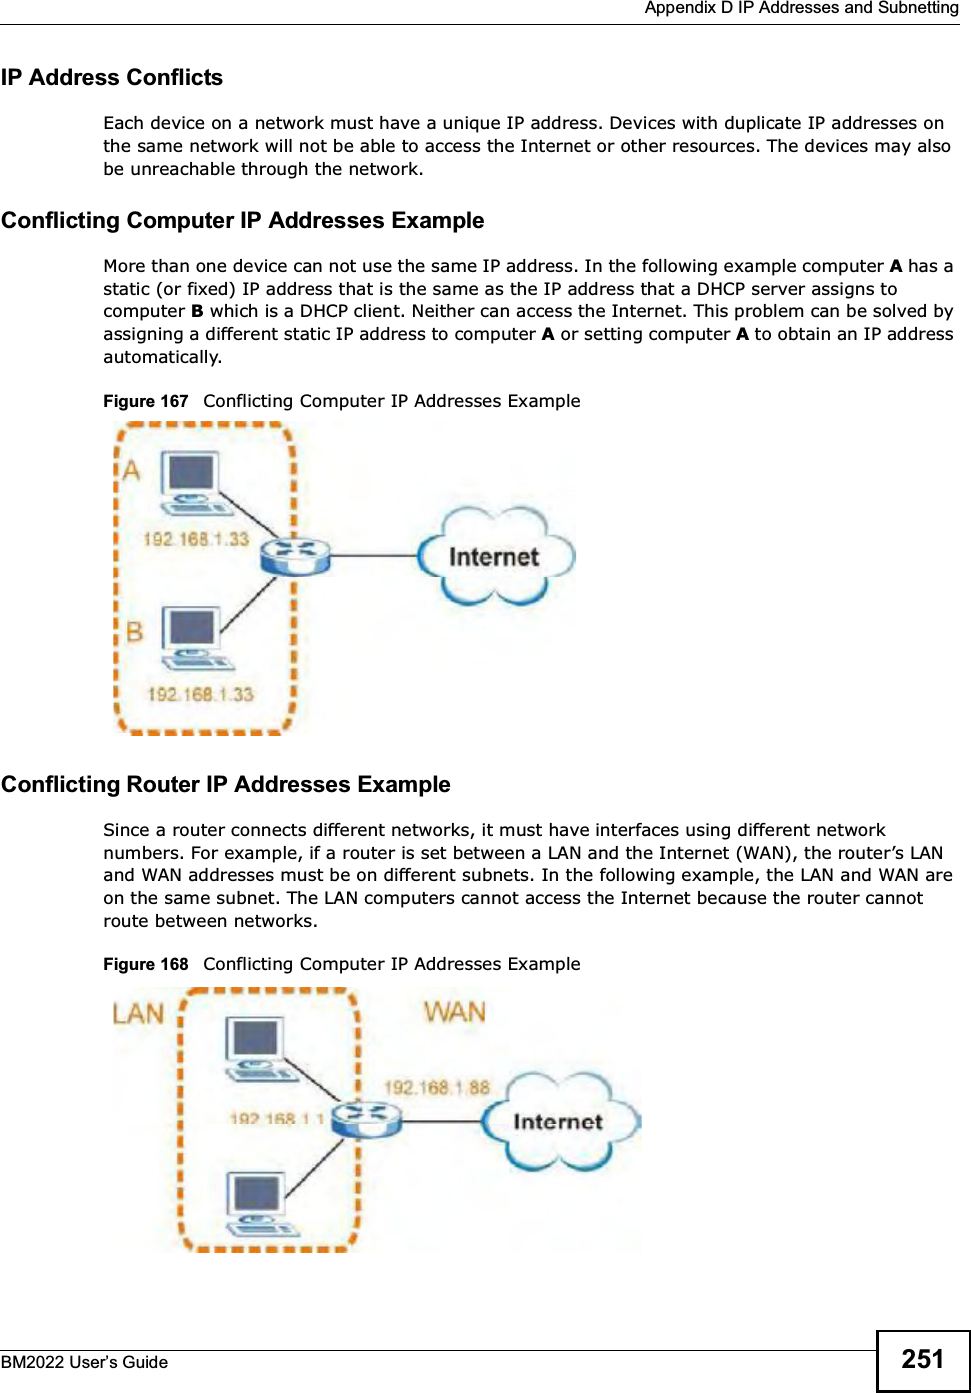  Appendix D IP Addresses and SubnettingBM2022 Users Guide 251IP Address ConflictsEach device on a network must have a unique IP address. Devices with duplicate IP addresses on the same network will not be able to access the Internet or other resources. The devices may also be unreachable through the network. Conflicting Computer IP Addresses ExampleMore than one device can not use the same IP address. In the following example computer A has a static (or fixed) IP address that is the same as the IP address that a DHCP server assigns to computer B which is a DHCP client. Neither can access the Internet. This problem can be solved by assigning a different static IP address to computer A or setting computer A to obtain an IP address automatically.  Figure 167   Conflicting Computer IP Addresses ExampleConflicting Router IP Addresses ExampleSince a router connects different networks, it must have interfaces using different network numbers. For example, if a router is set between a LAN and the Internet (WAN), the routers LAN and WAN addresses must be on different subnets. In the following example, the LAN and WAN are on the same subnet. The LAN computers cannot access the Internet because the router cannot route between networks.Figure 168   Conflicting Computer IP Addresses Example